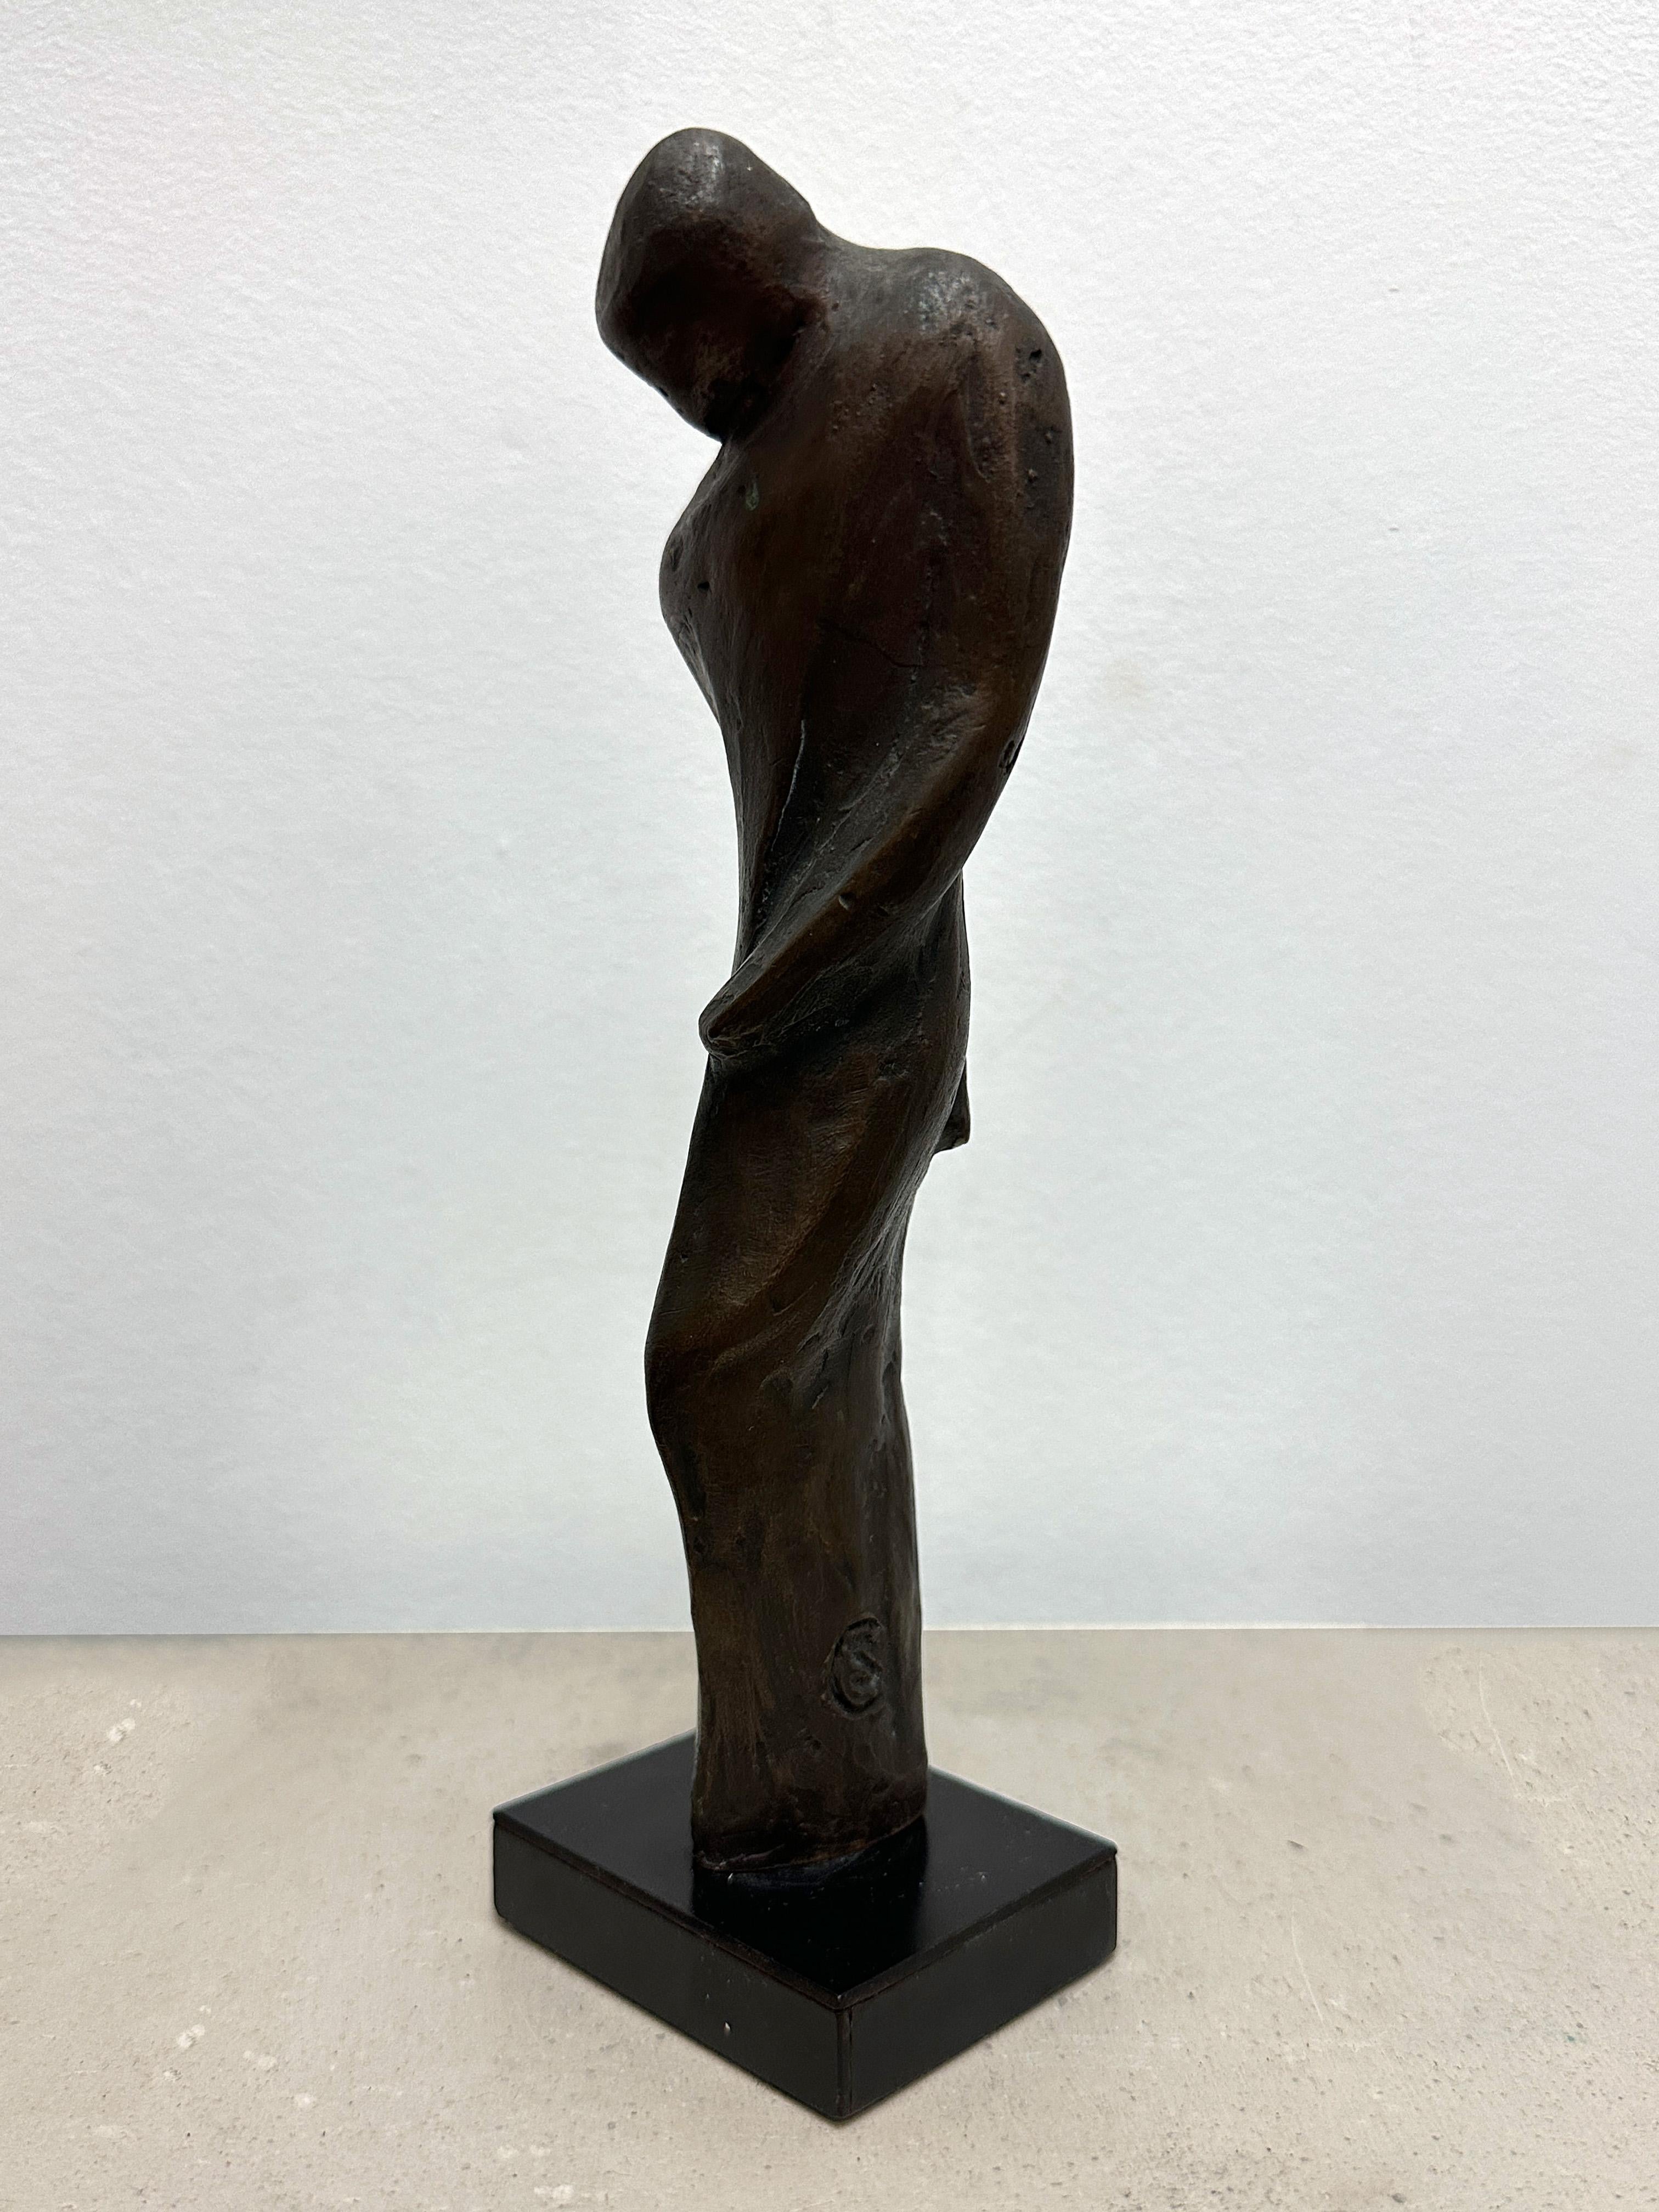 Bronze sculpture of a standing figure, by artist Caroline Stacey. In excellent condition. The dimensions are 2.5